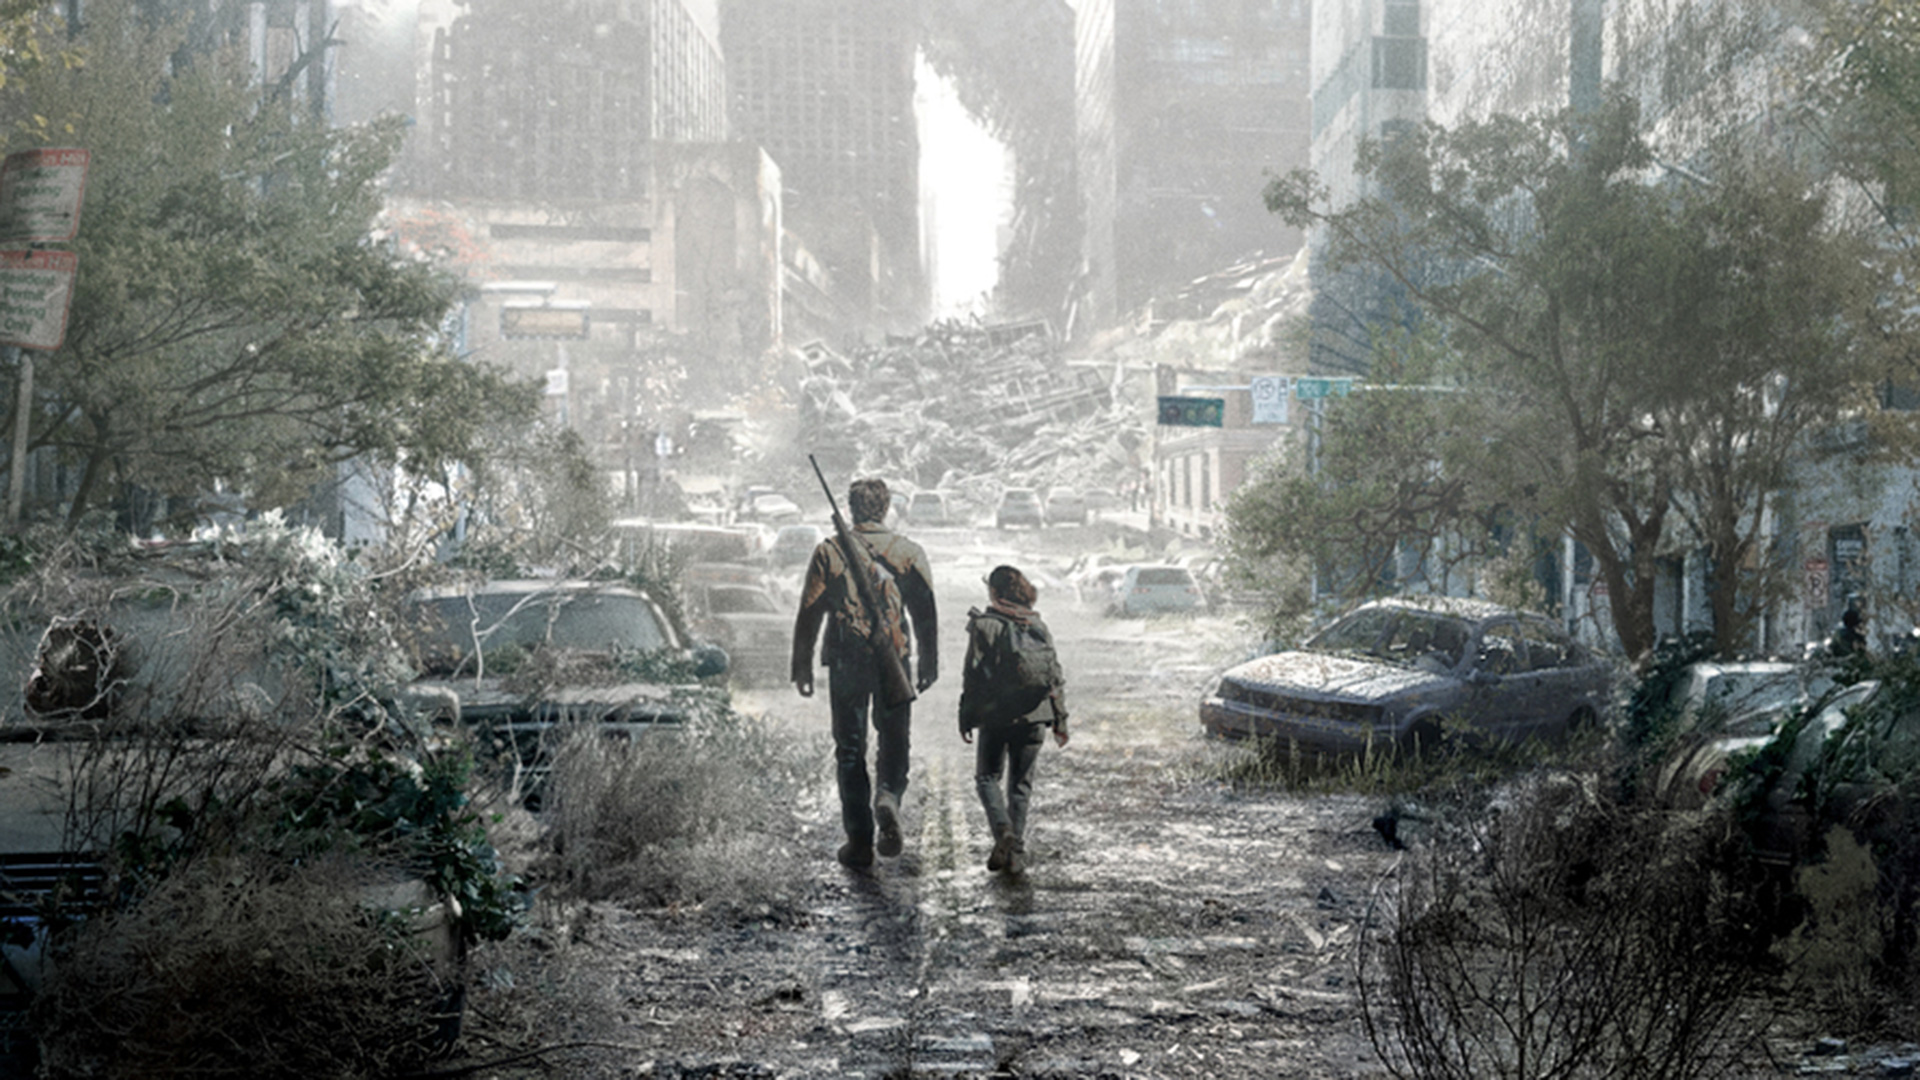 HBO's The Last of Us series premieres January 15th